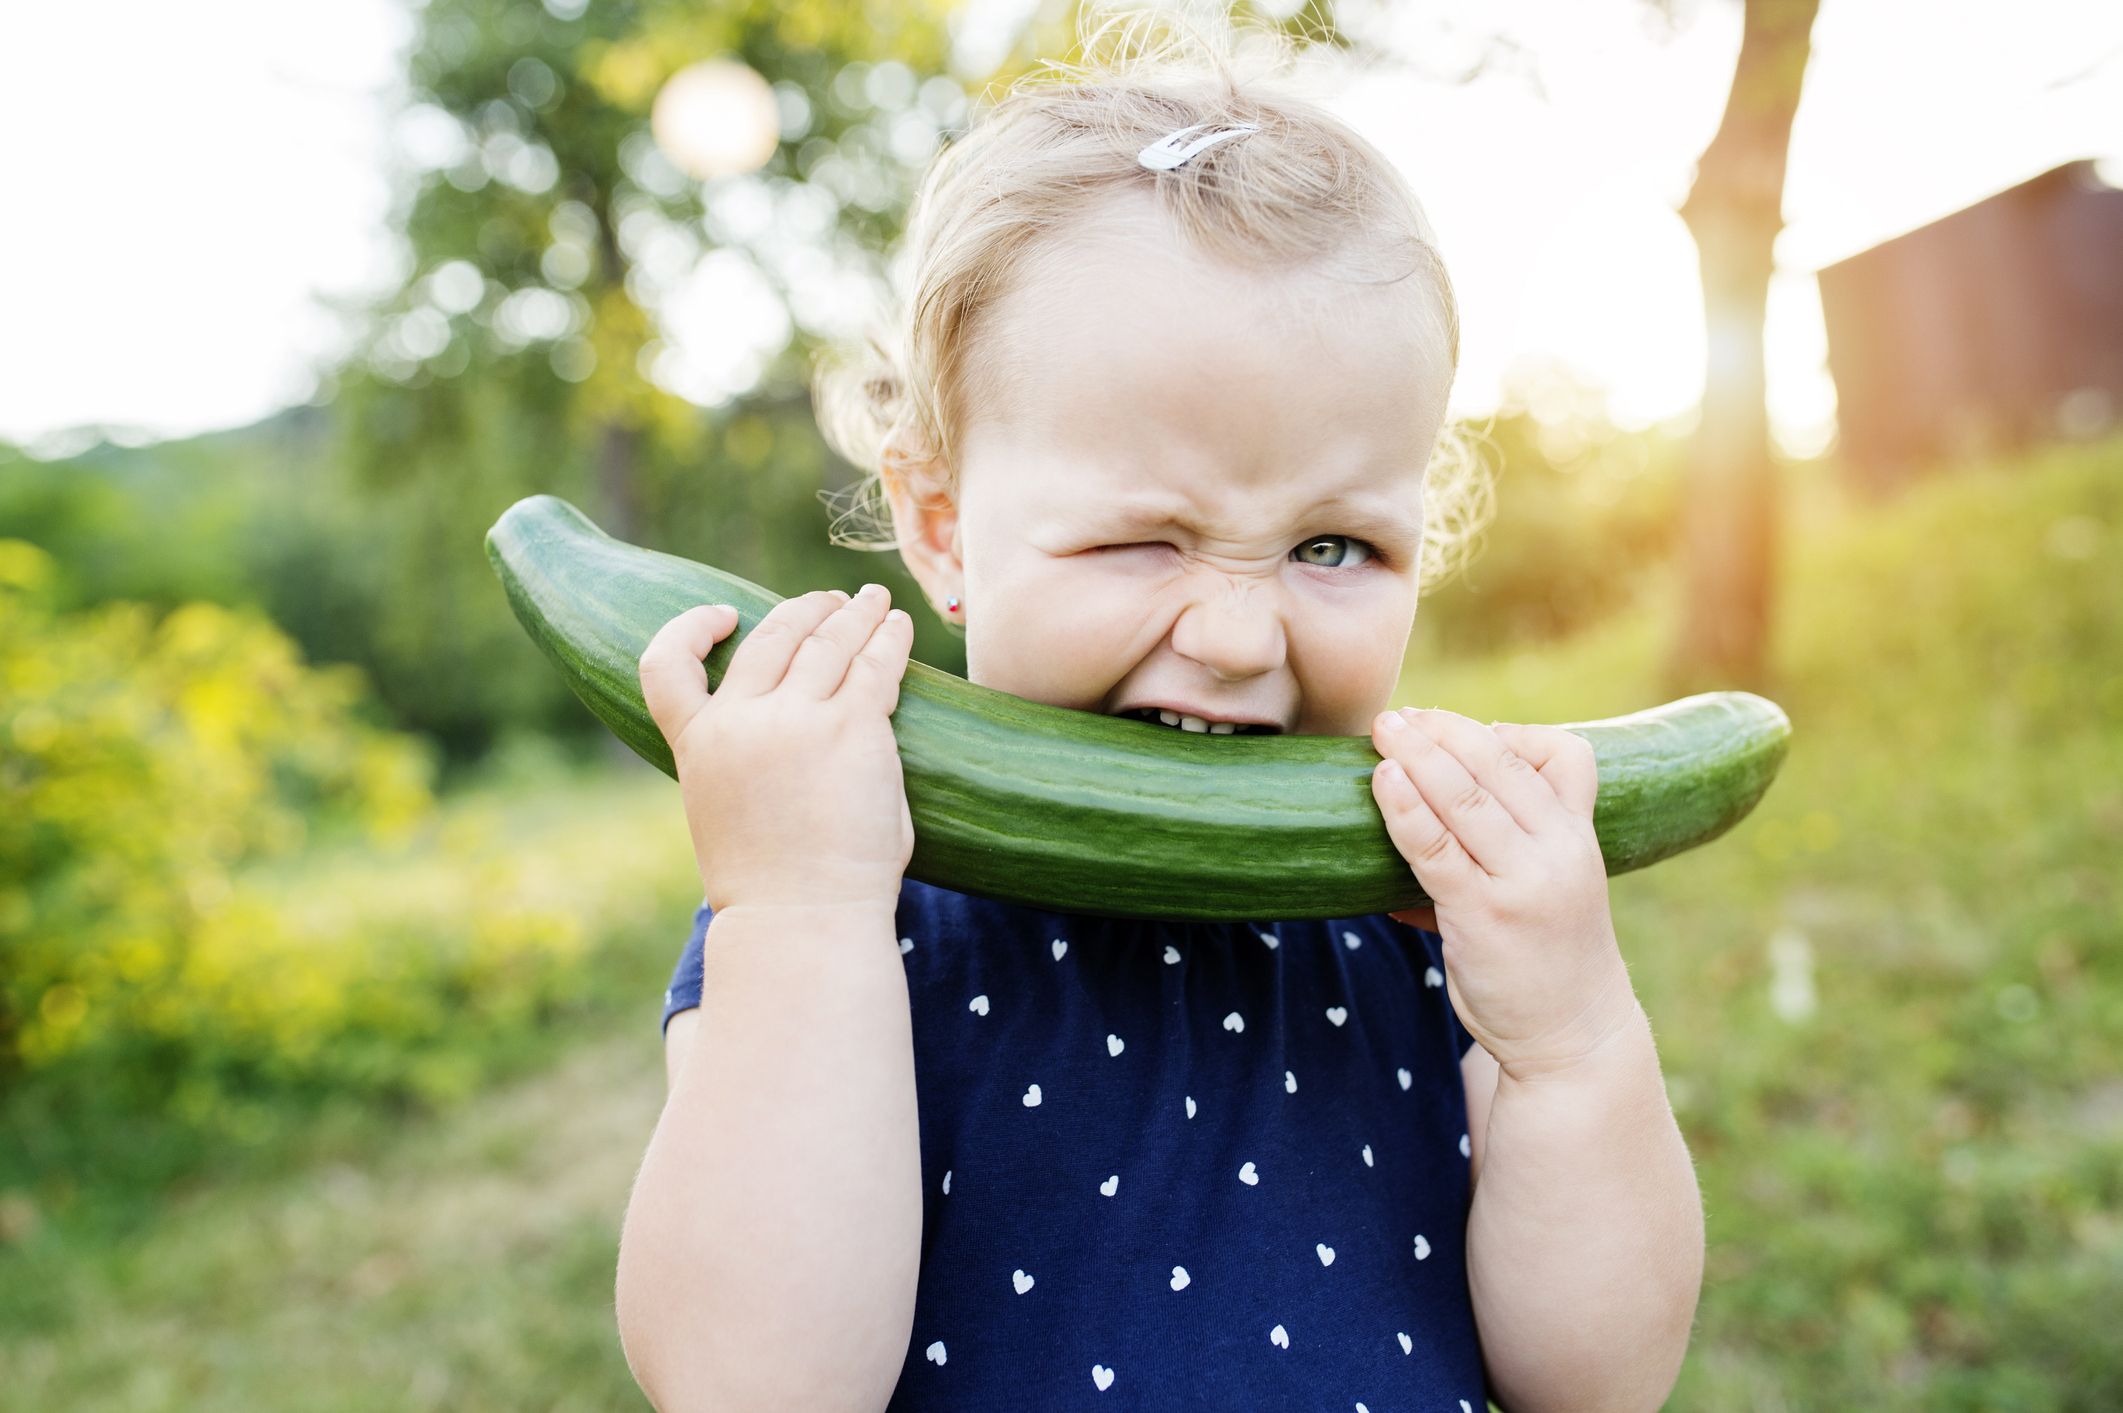 50 Unique Baby Names Inspired By Food Rare Foodie Baby Names For Boys And Girls